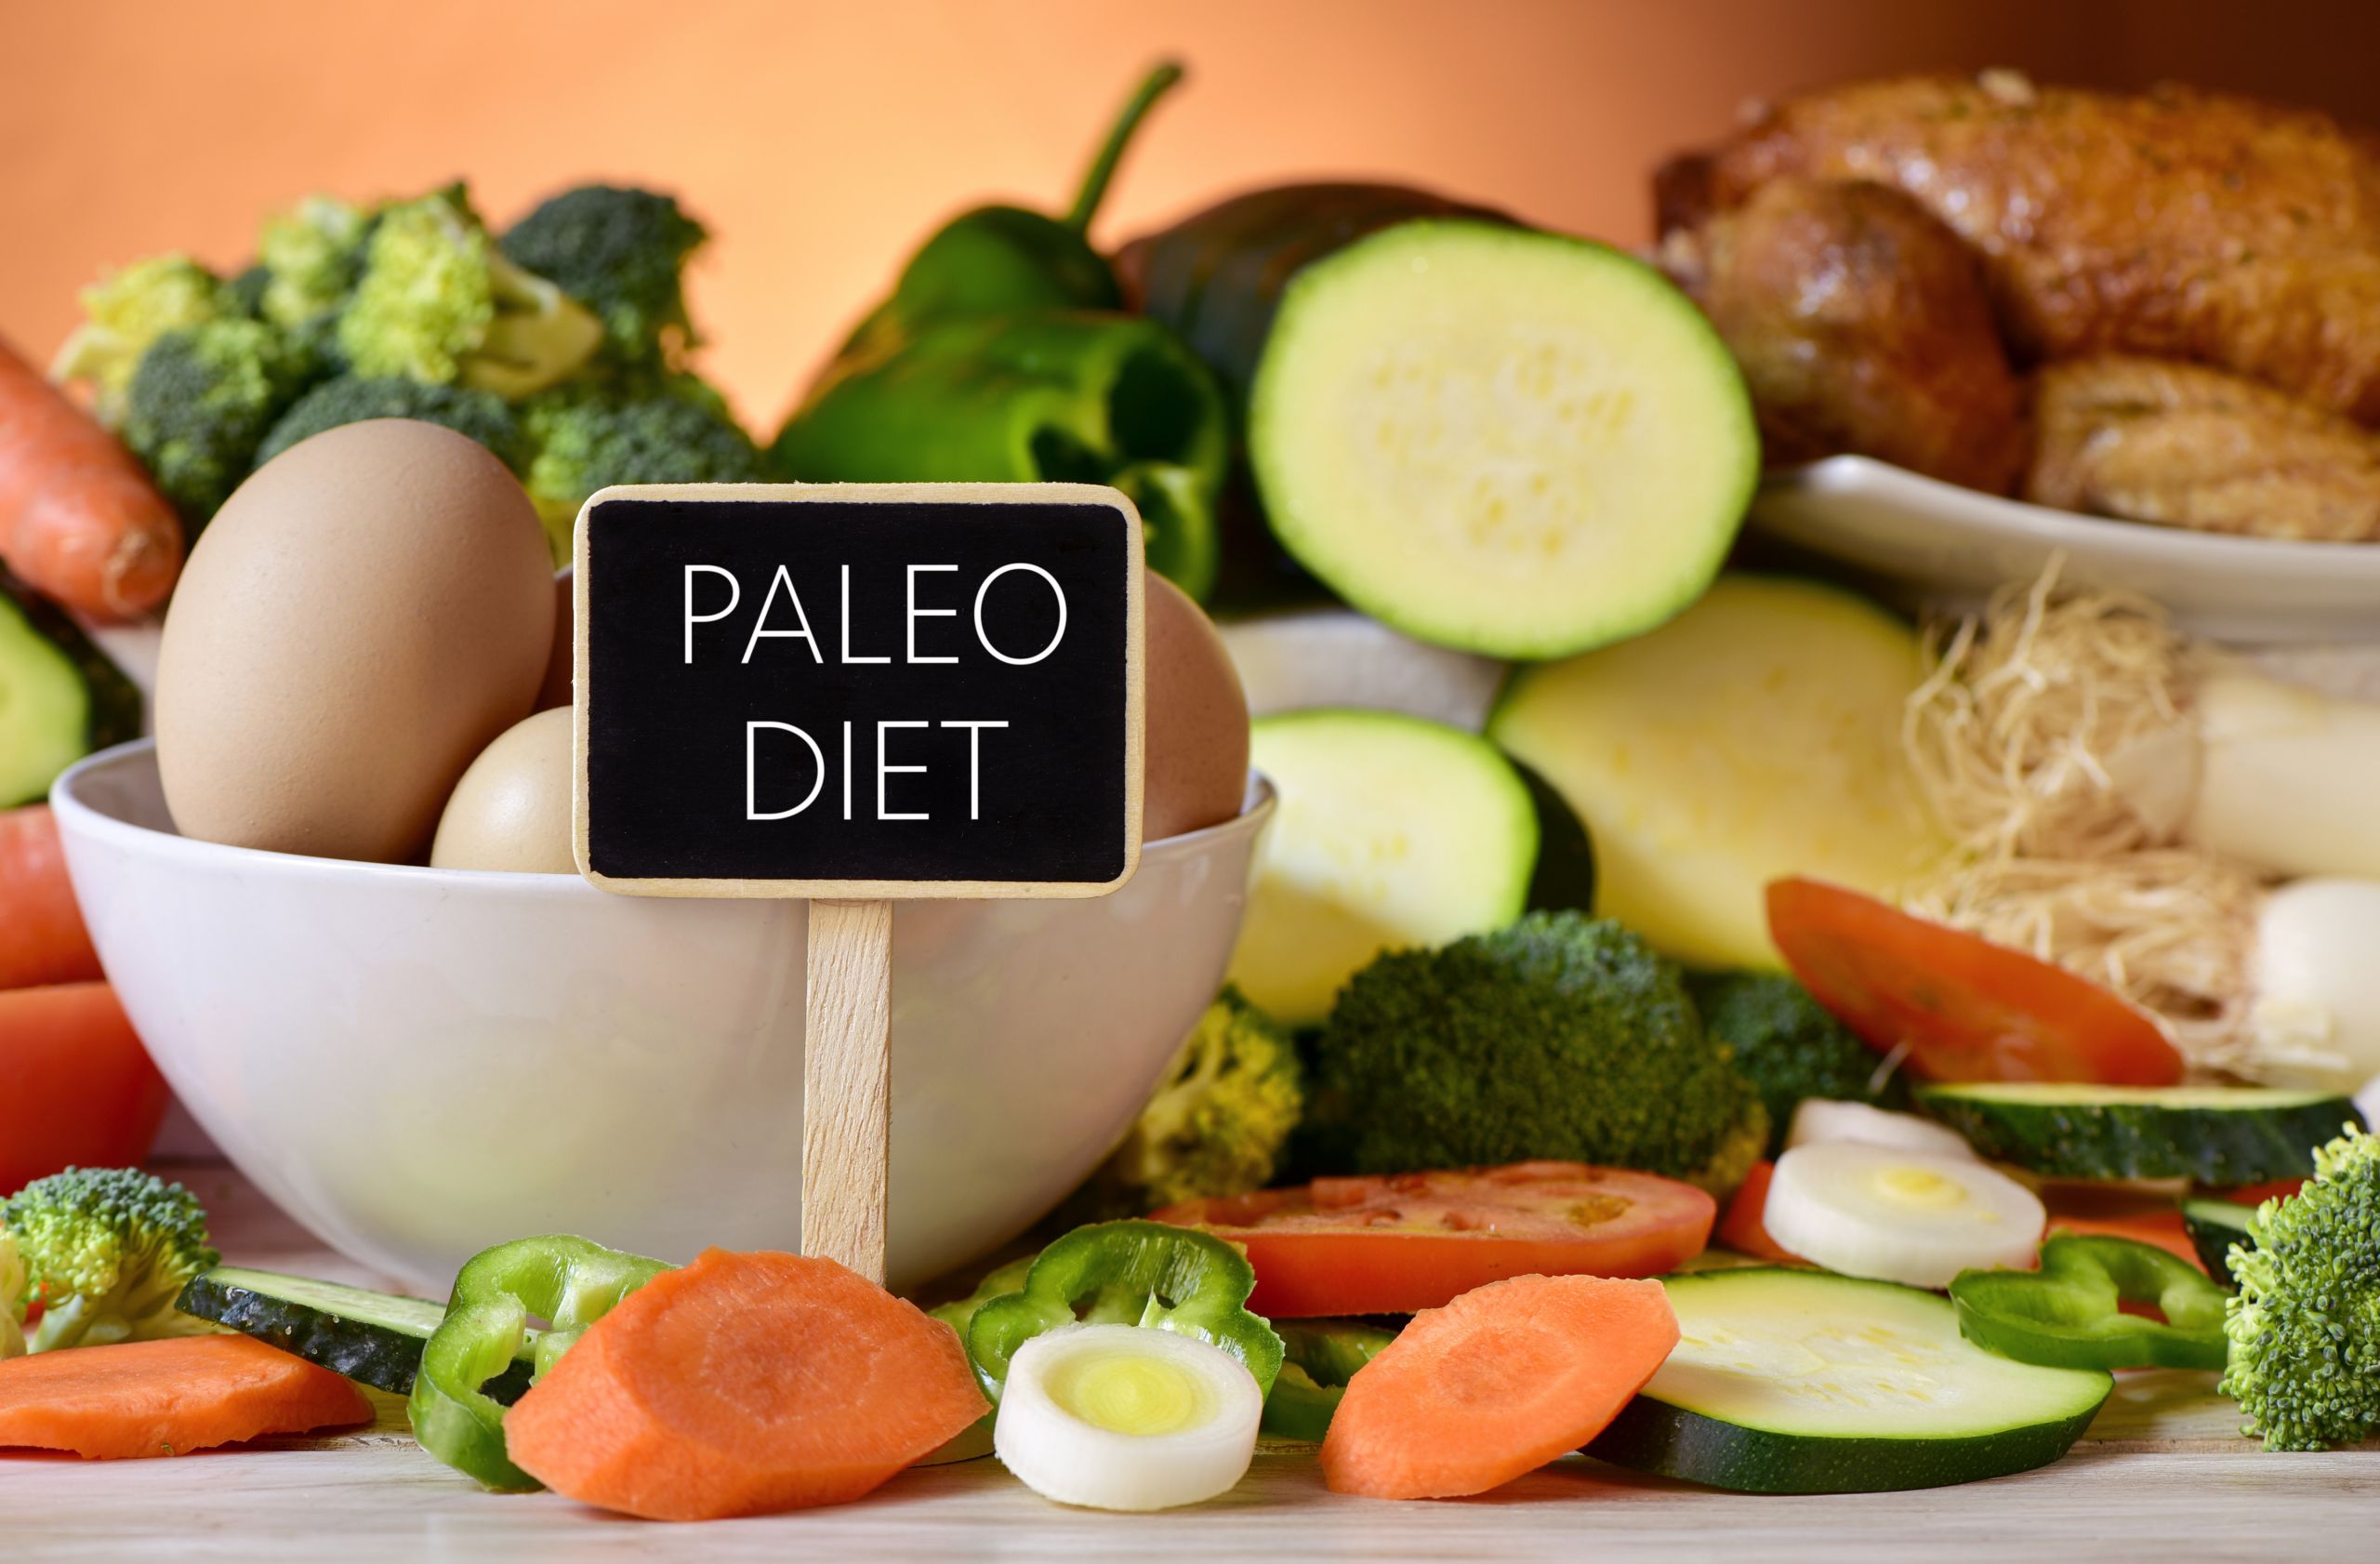 Don’t Miss Our 15 Most Shared Paleo Style Diet